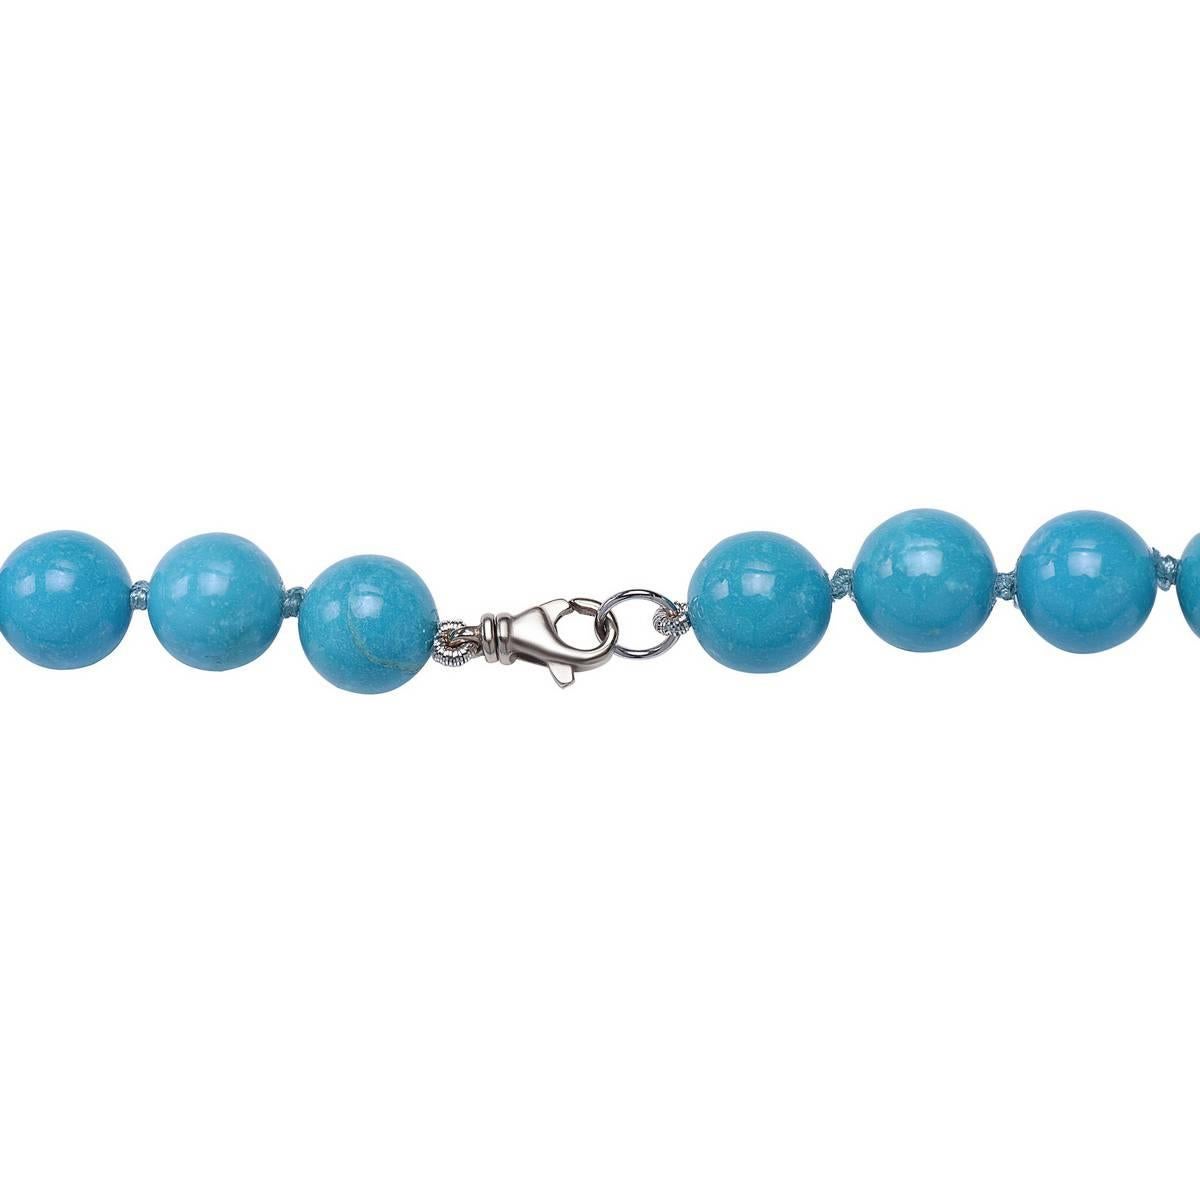 Modern Charming Turquoise Necklace with Diamond Beads